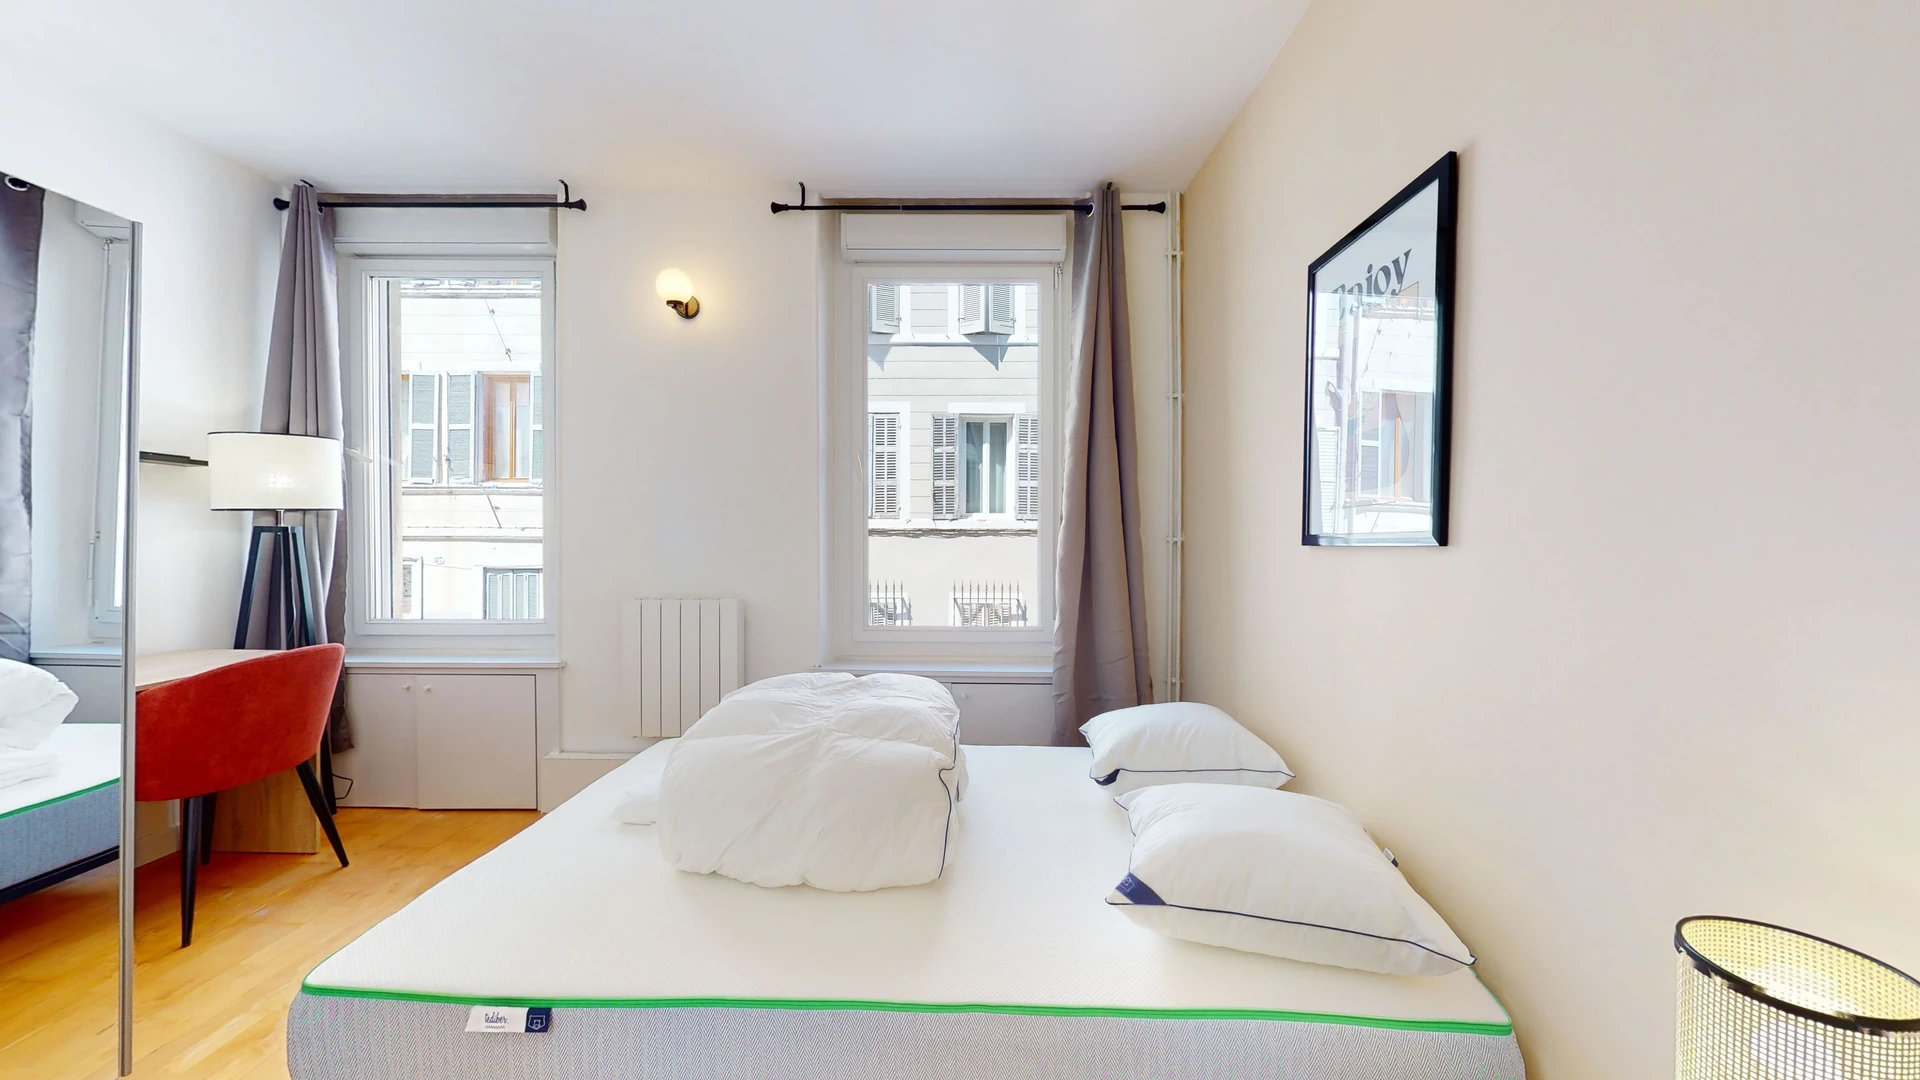 Picture of Private room at 28 rue de l'Olivier